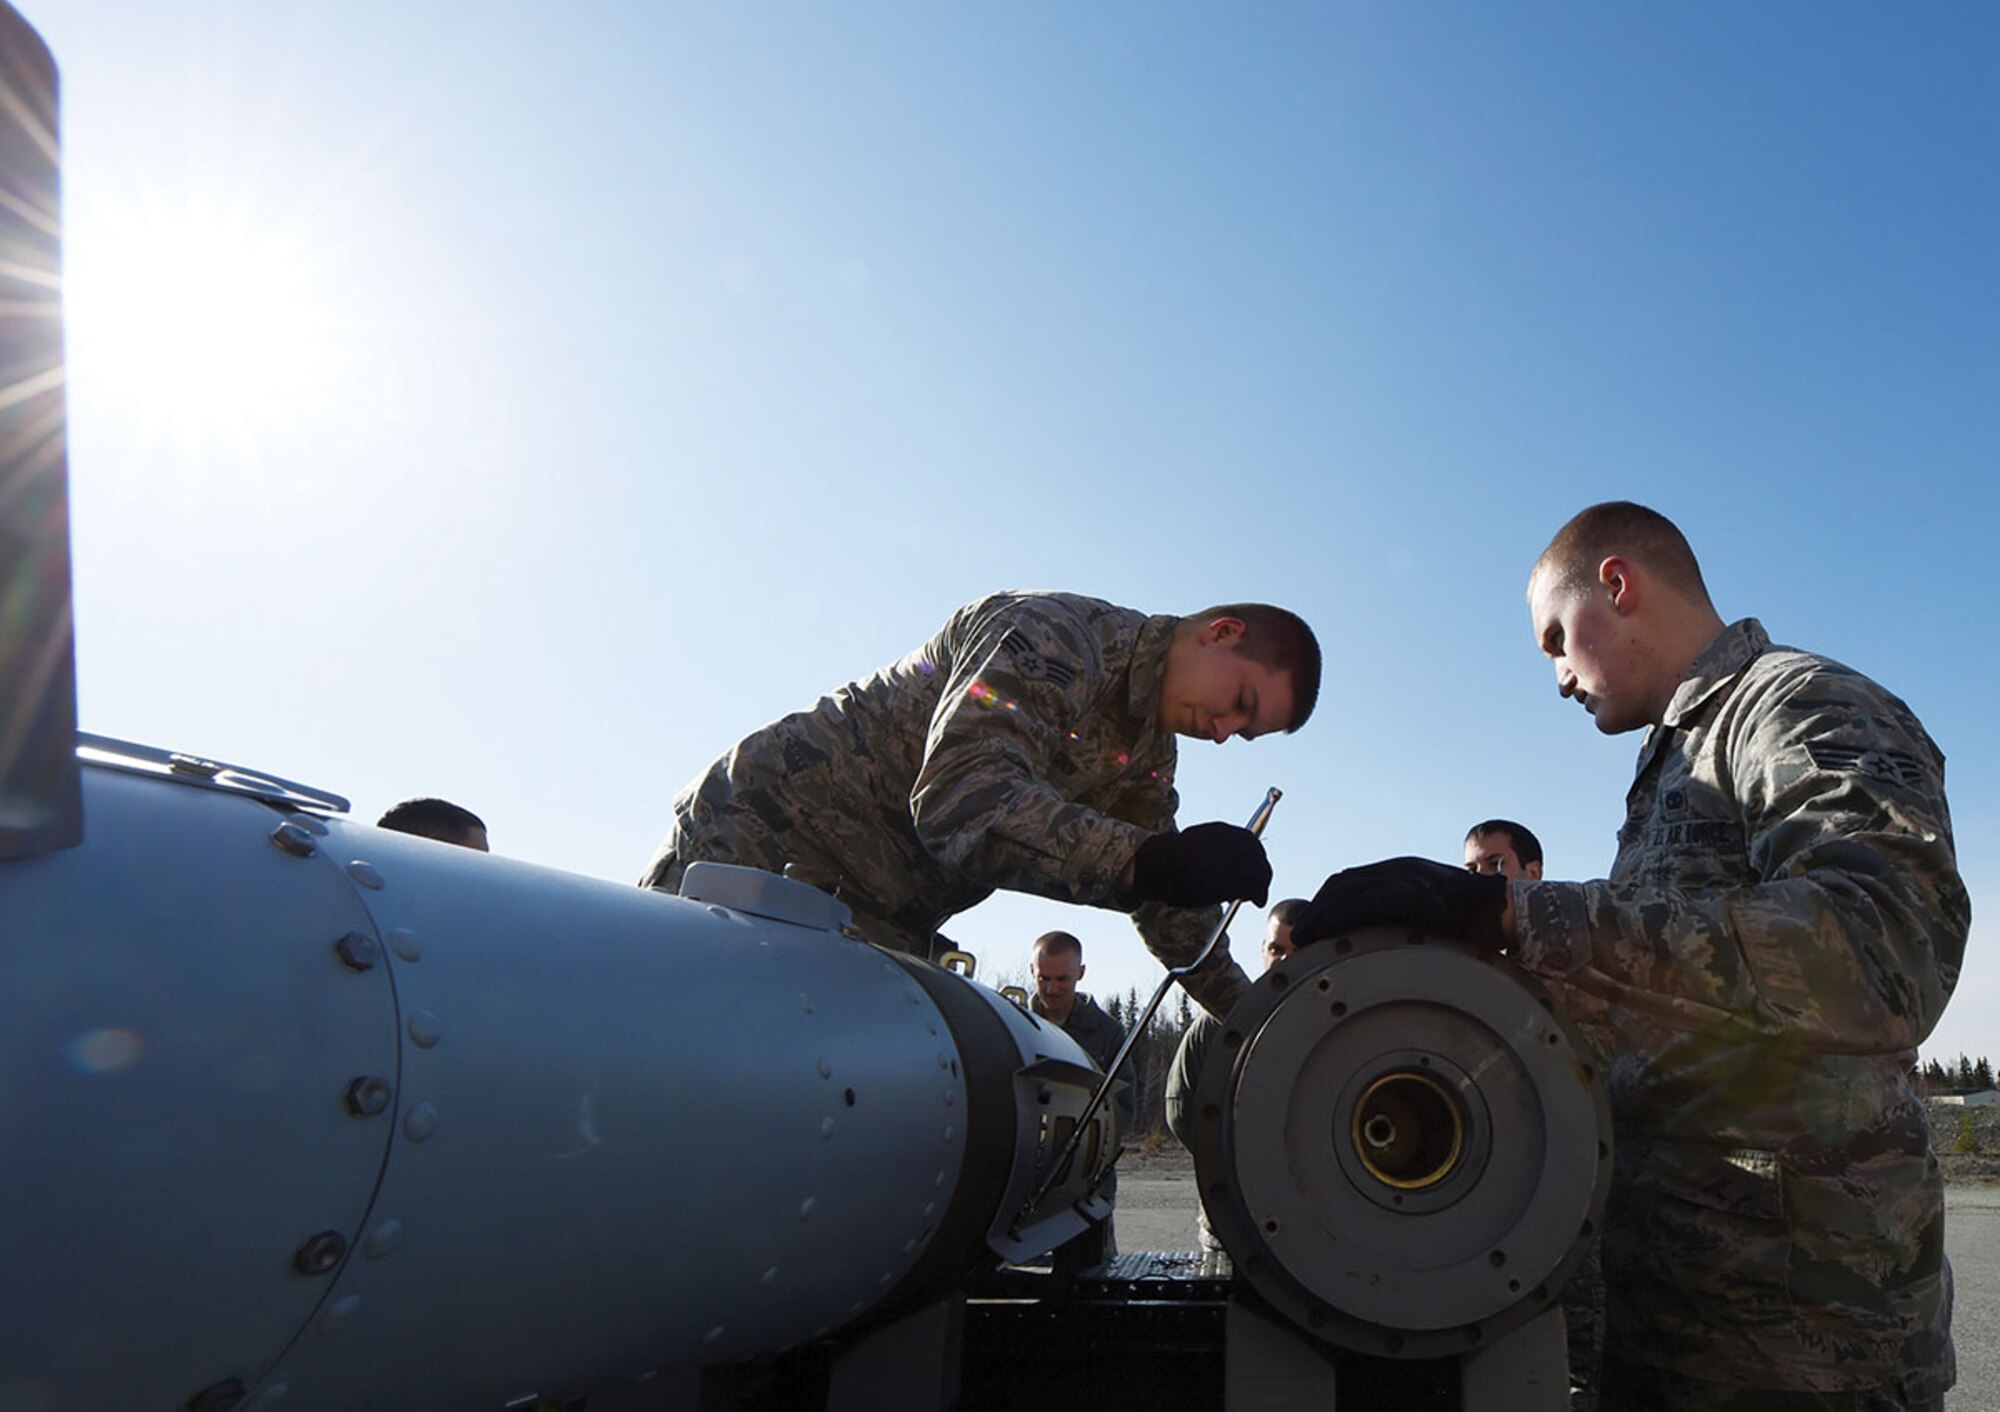 Senior Airmen Michael Crow (left) and Evan Kirchner, both assigned to the 3rd Munitions
Squadron, attach strakes to a GBU-32 Joint Direct Attack Munition during combat munitions training at Joint Base Elmendorf-Richardson April 23. (U.S. Air Force photo/Staff Sgt. Sheila deVera)